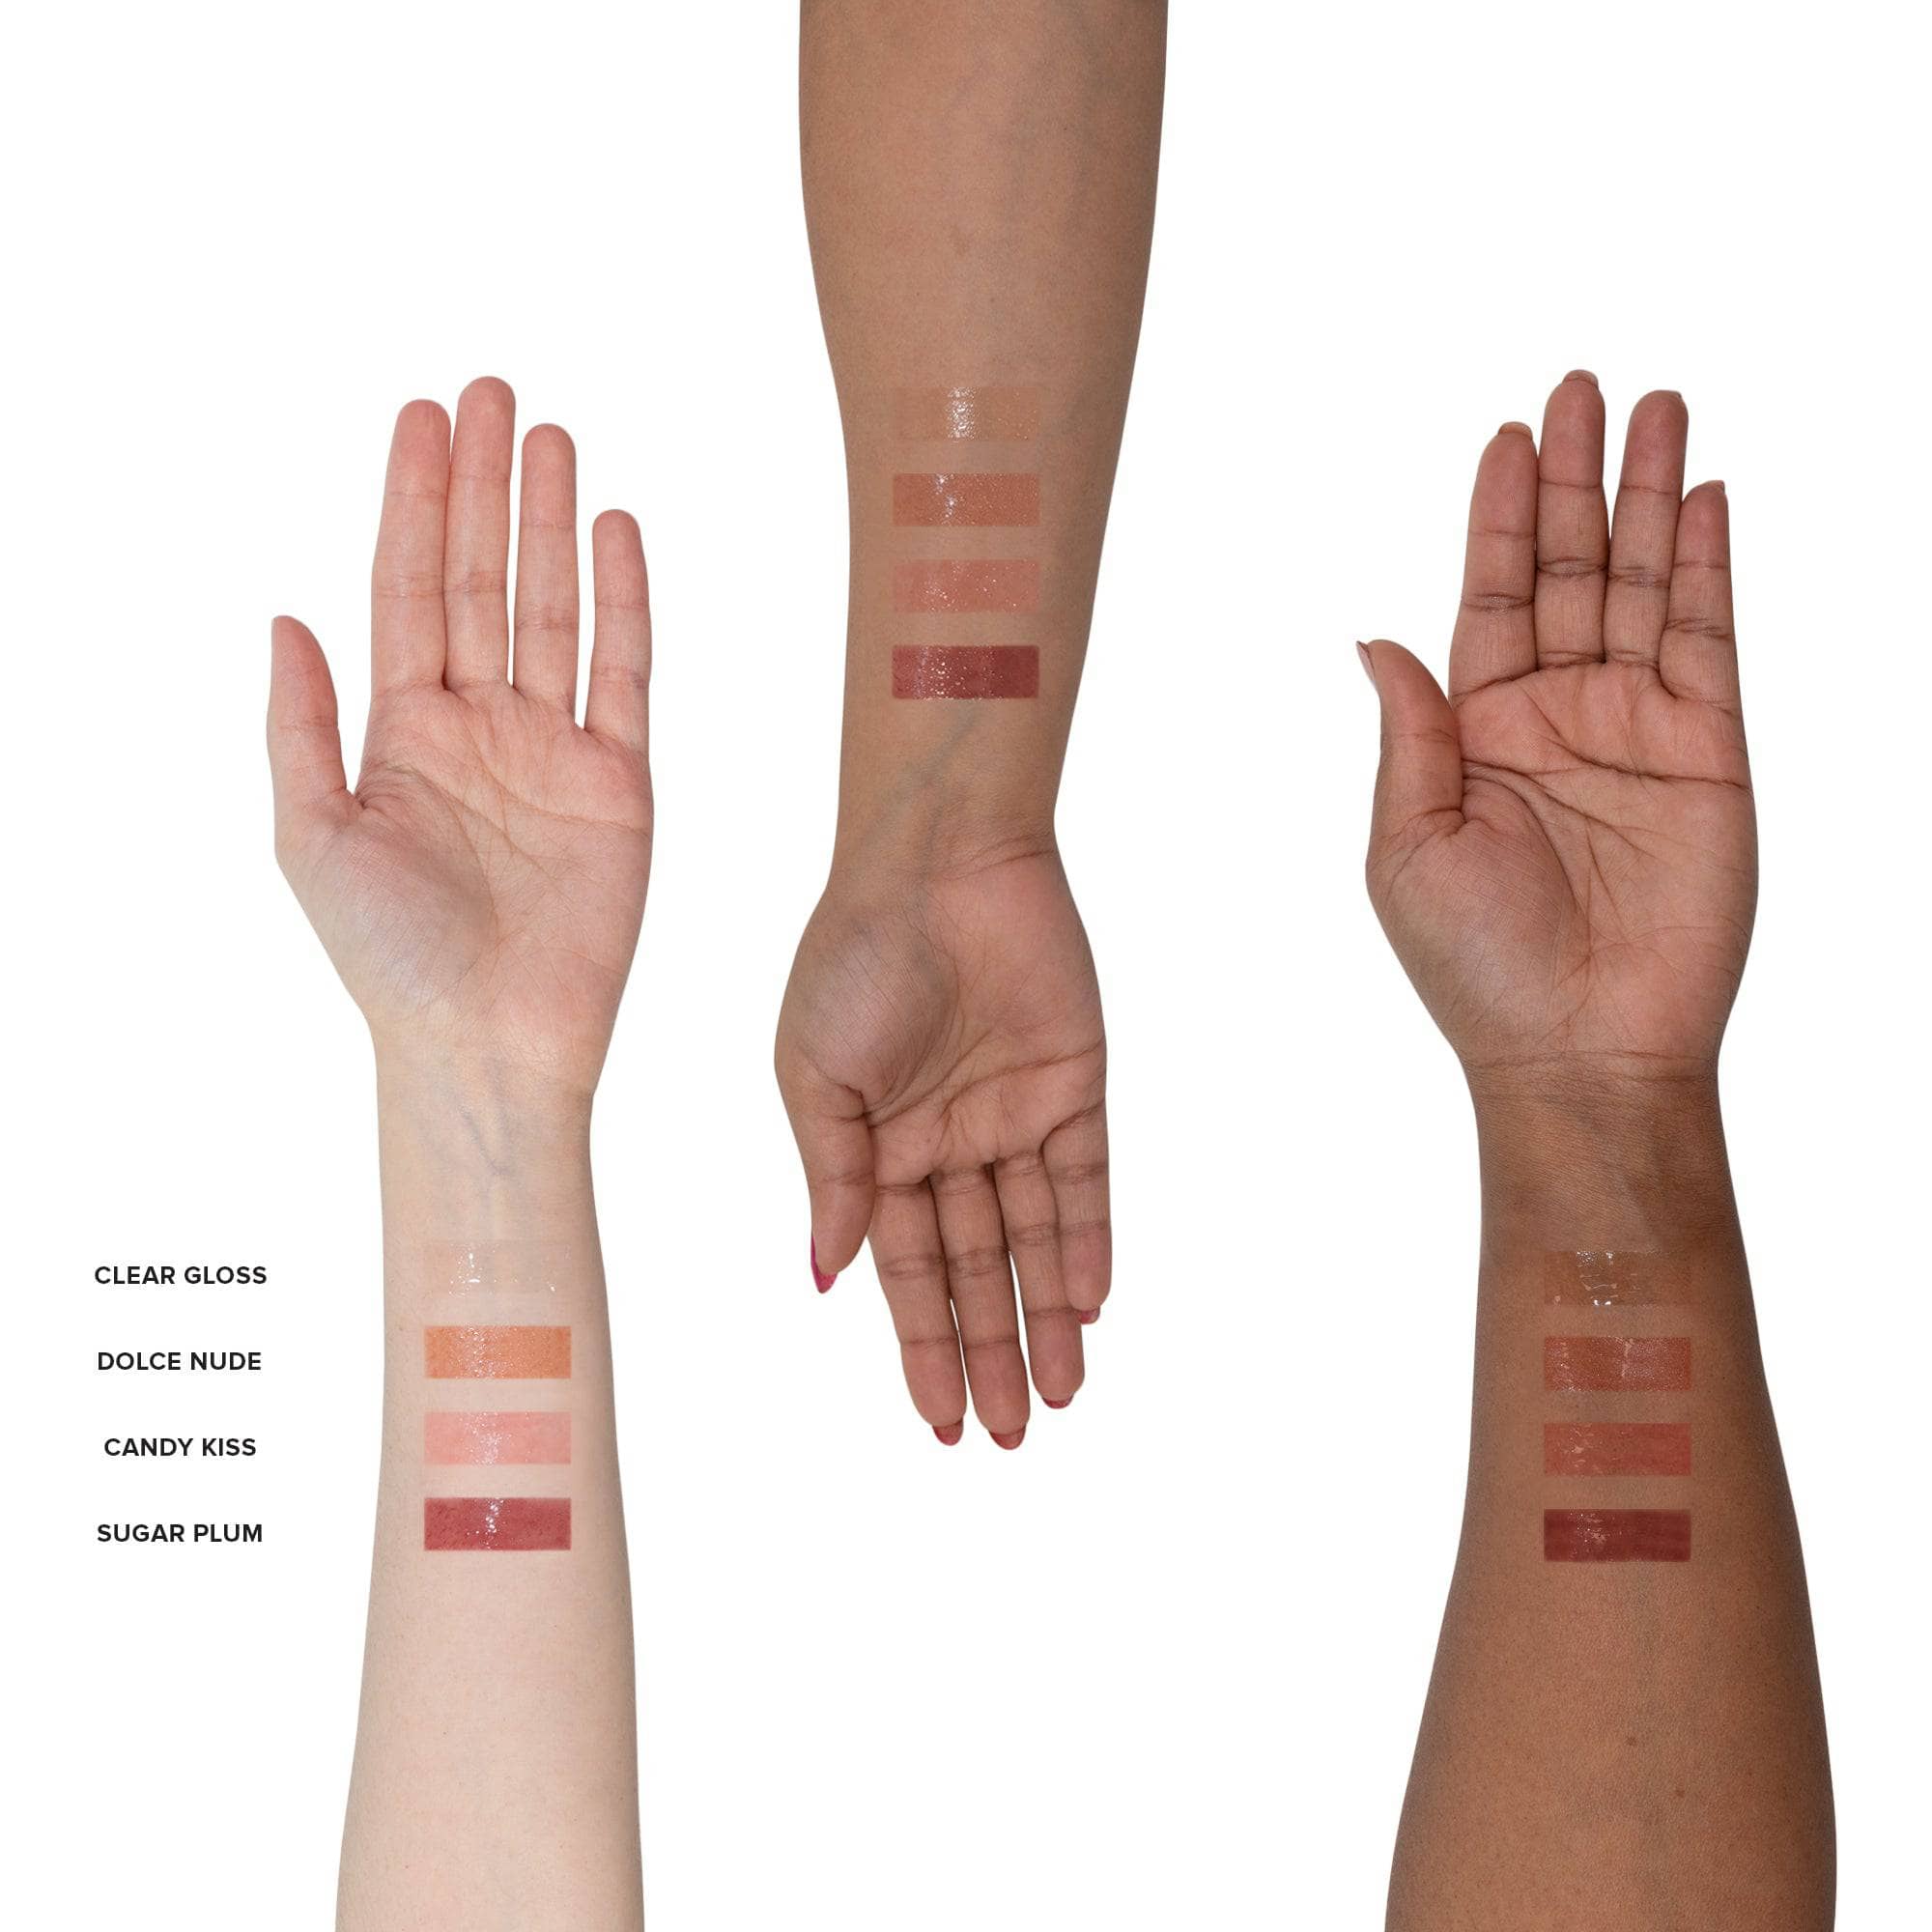 Three arms with Hydra-Peptide Lip Butter Dolce Nude texture swatches